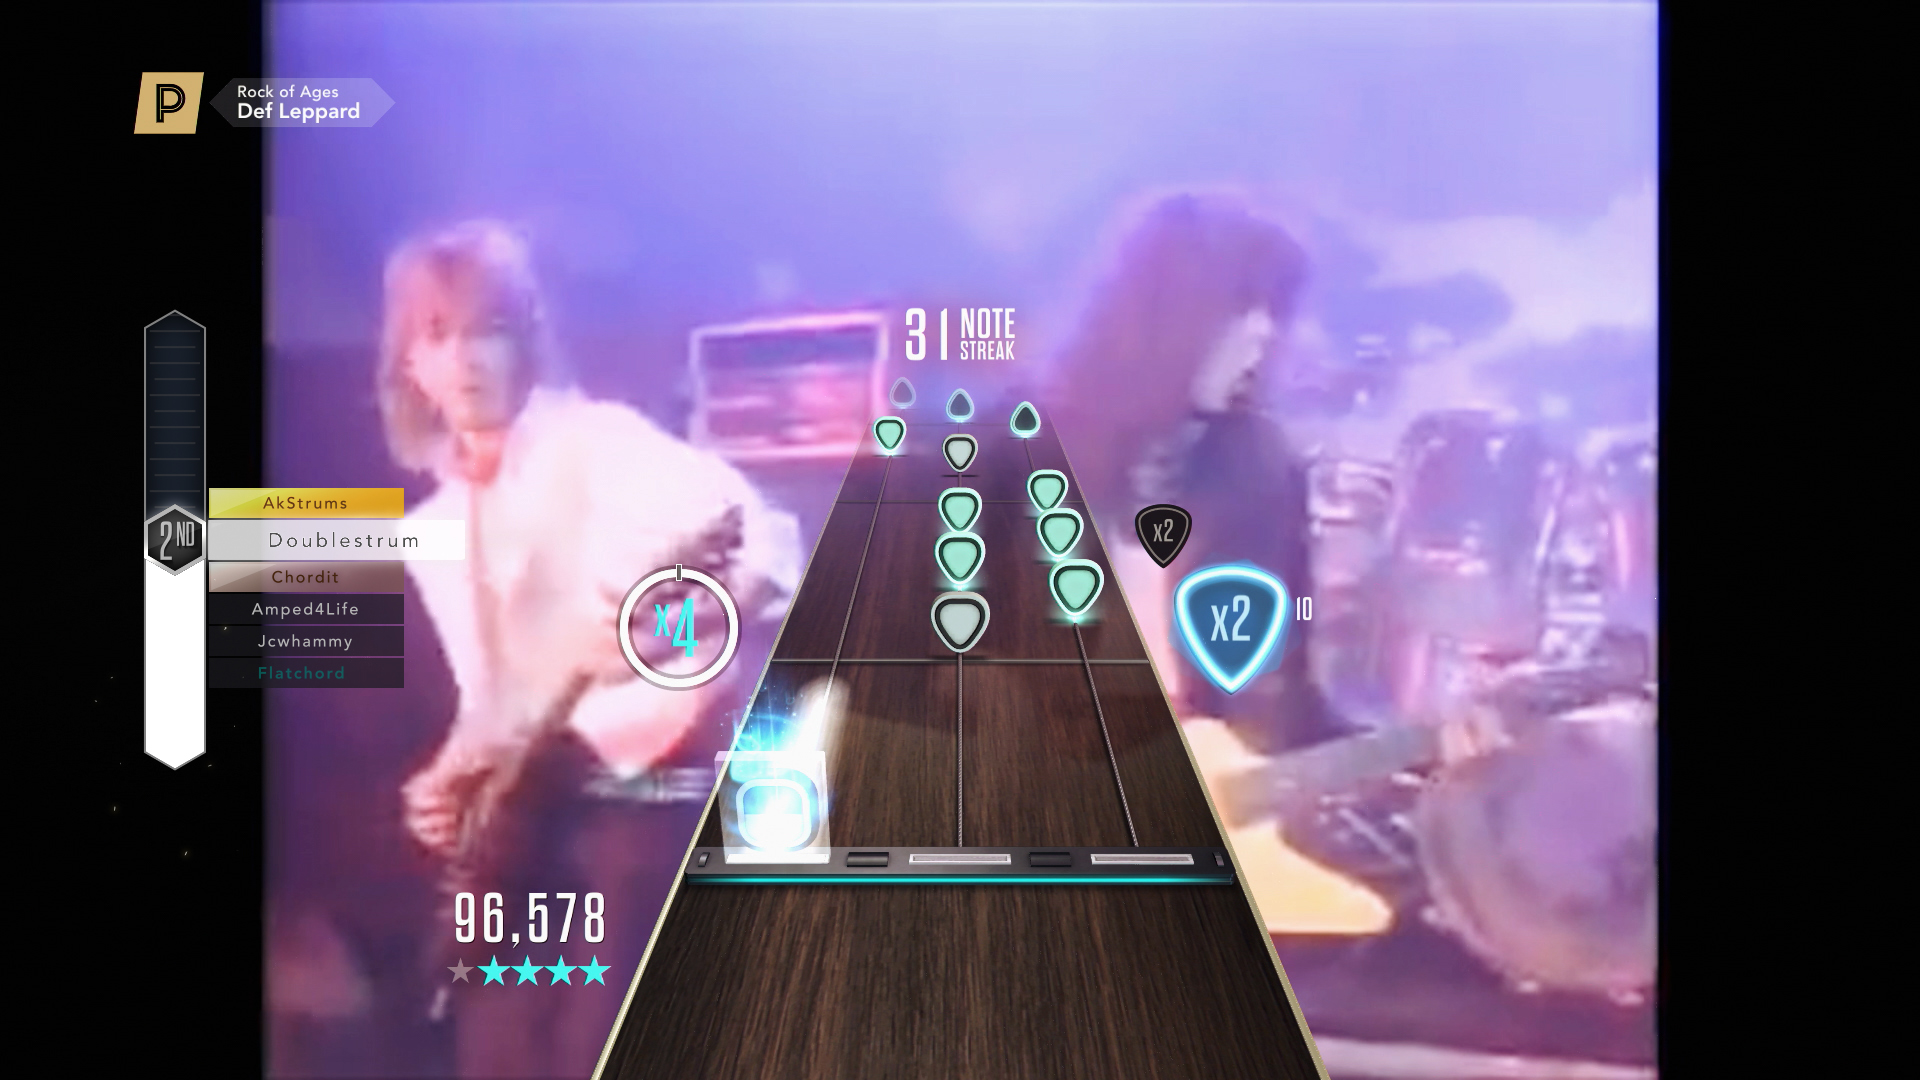 Def Leppard's 'Rock of Ages' Guitar Hero Live